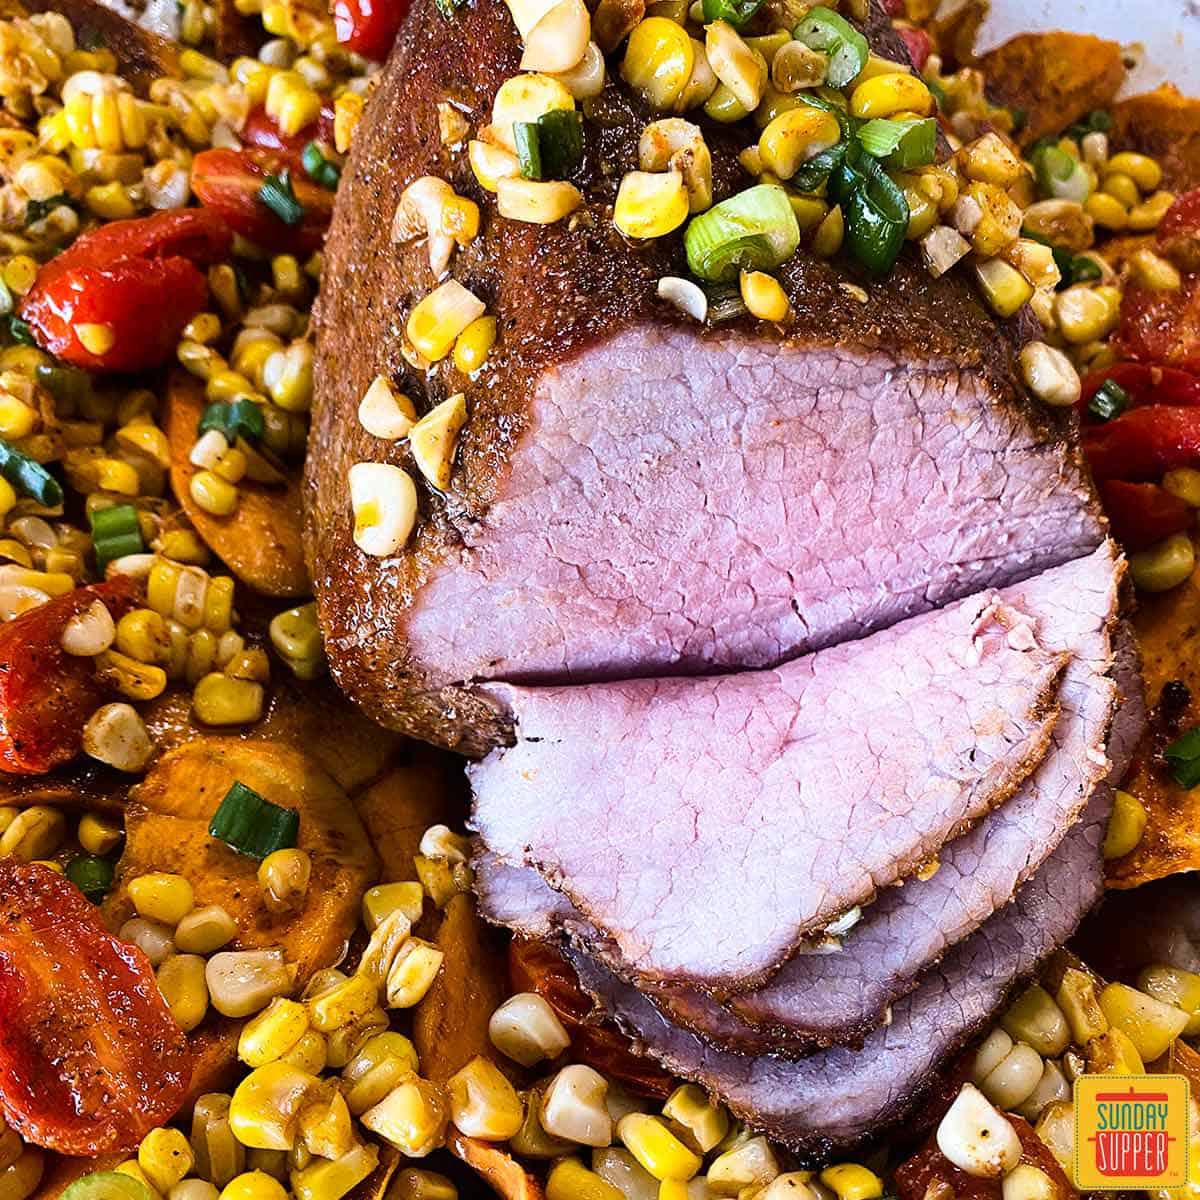 Eye of round roast with corn and tomatoes sliced